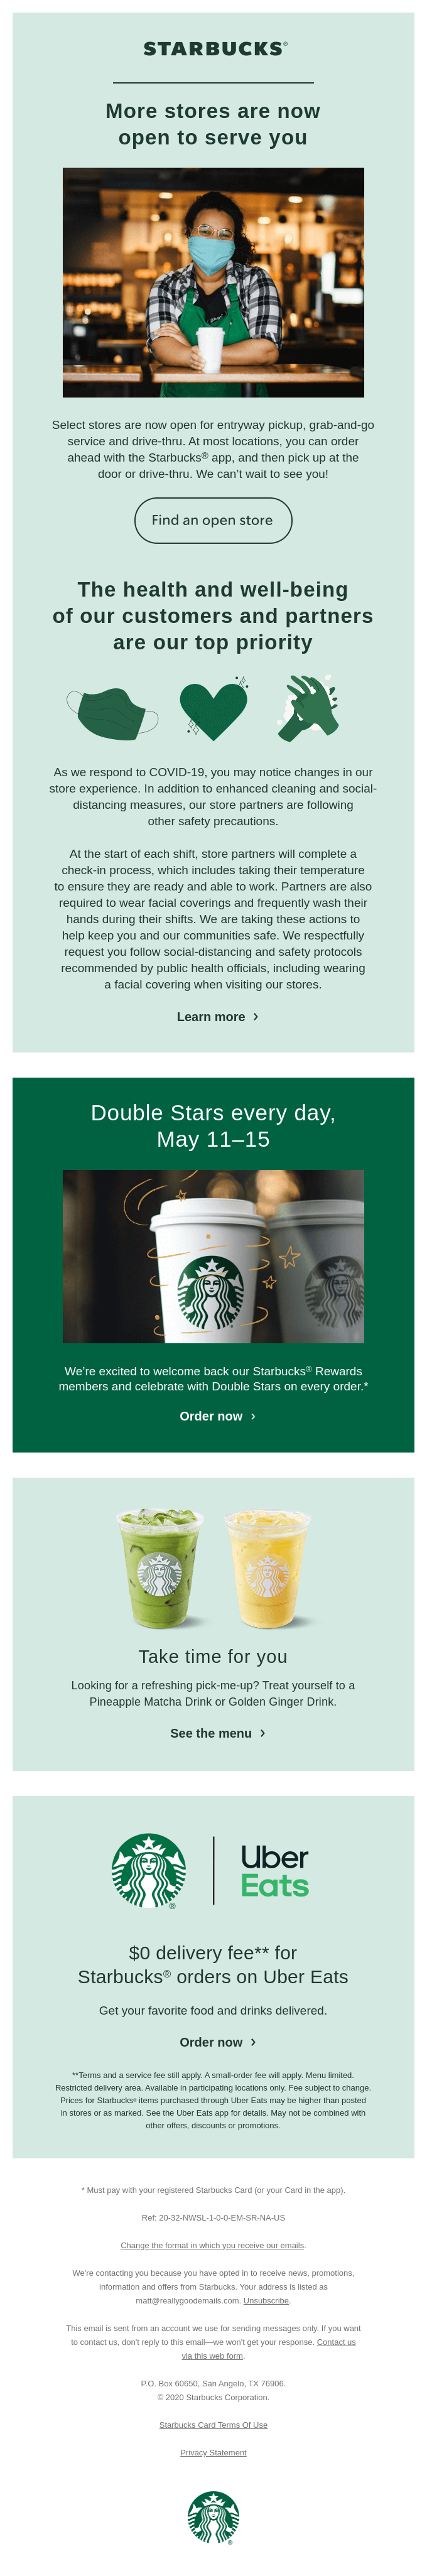 More stores are open to serve you ☕💚 - Starbucks Email Newsletter